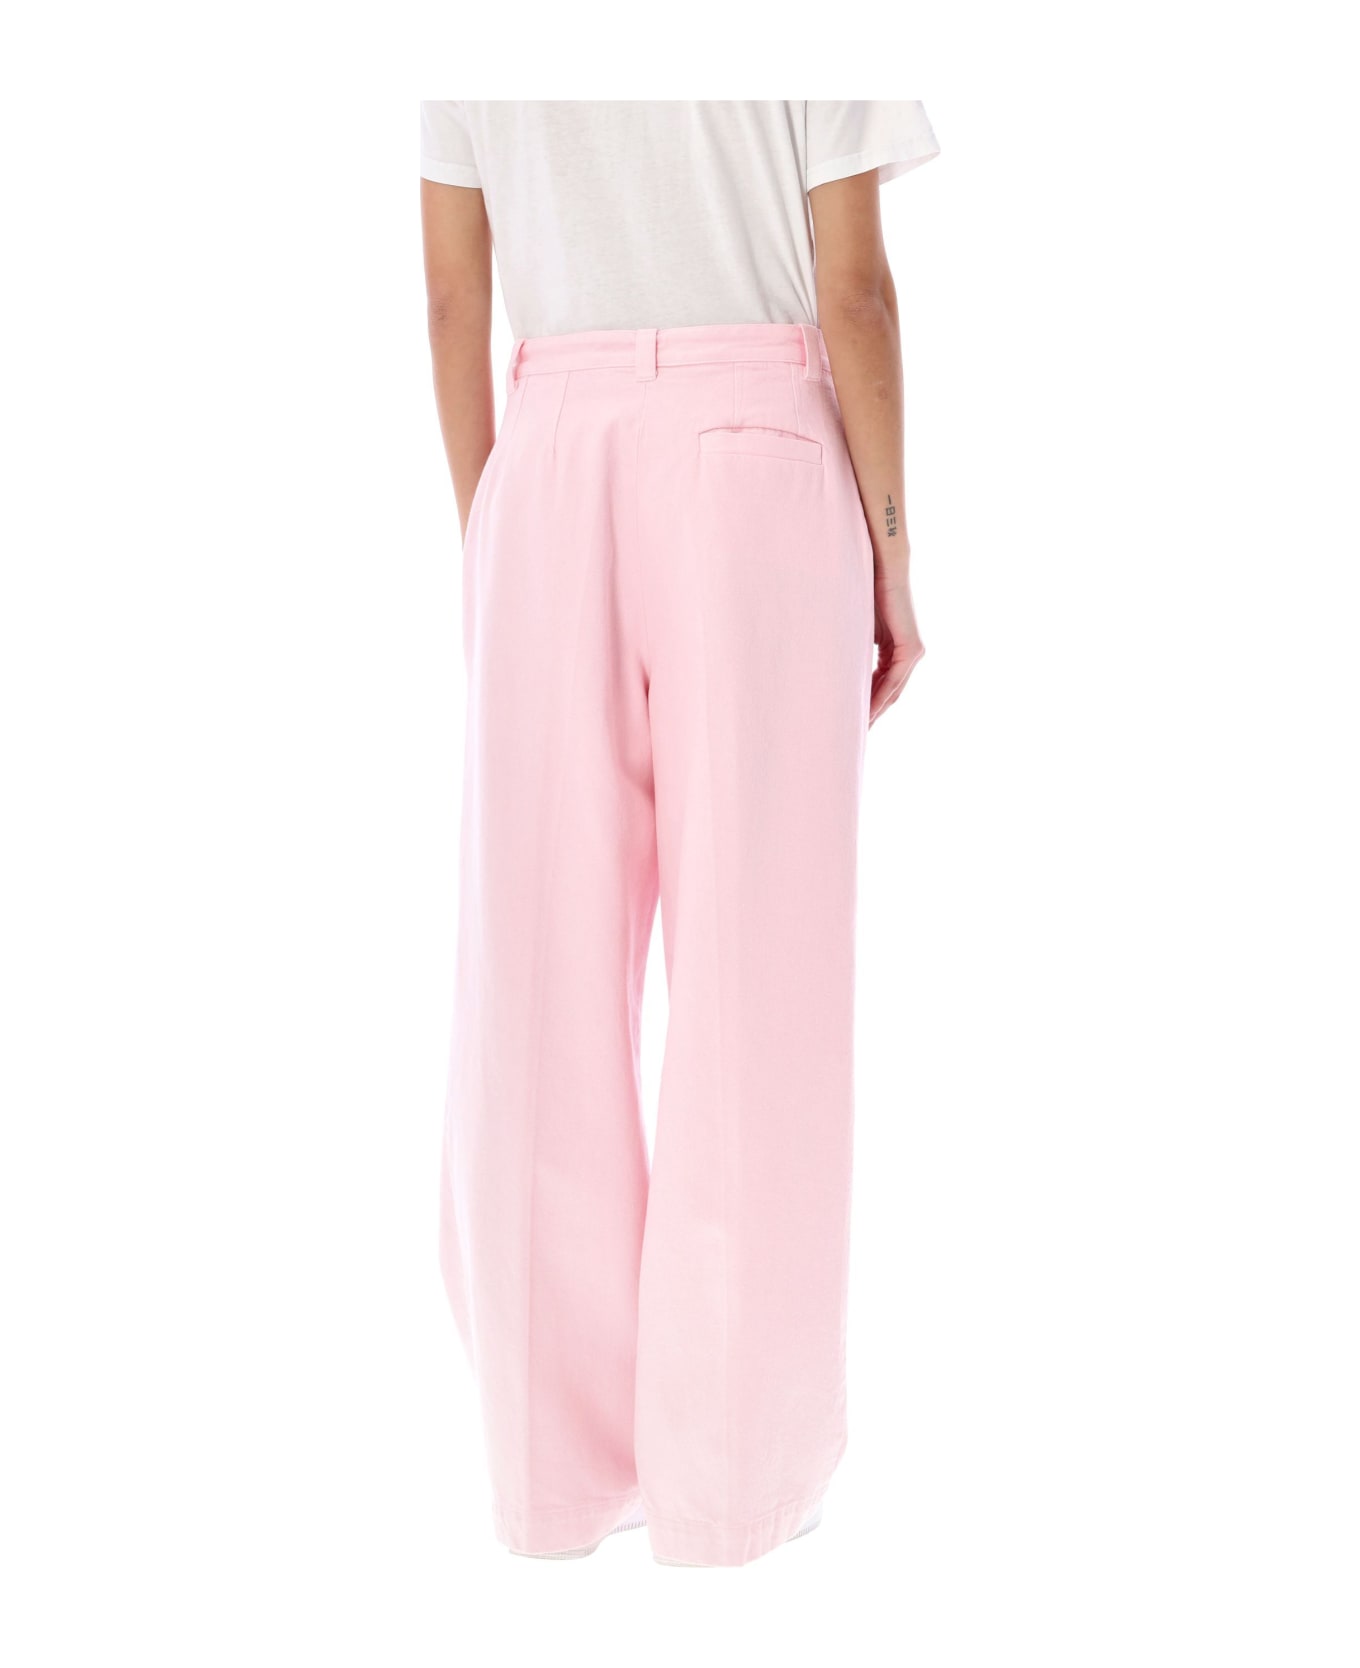 A.P.C. Tresse Pleated Jeans - PALE PINK